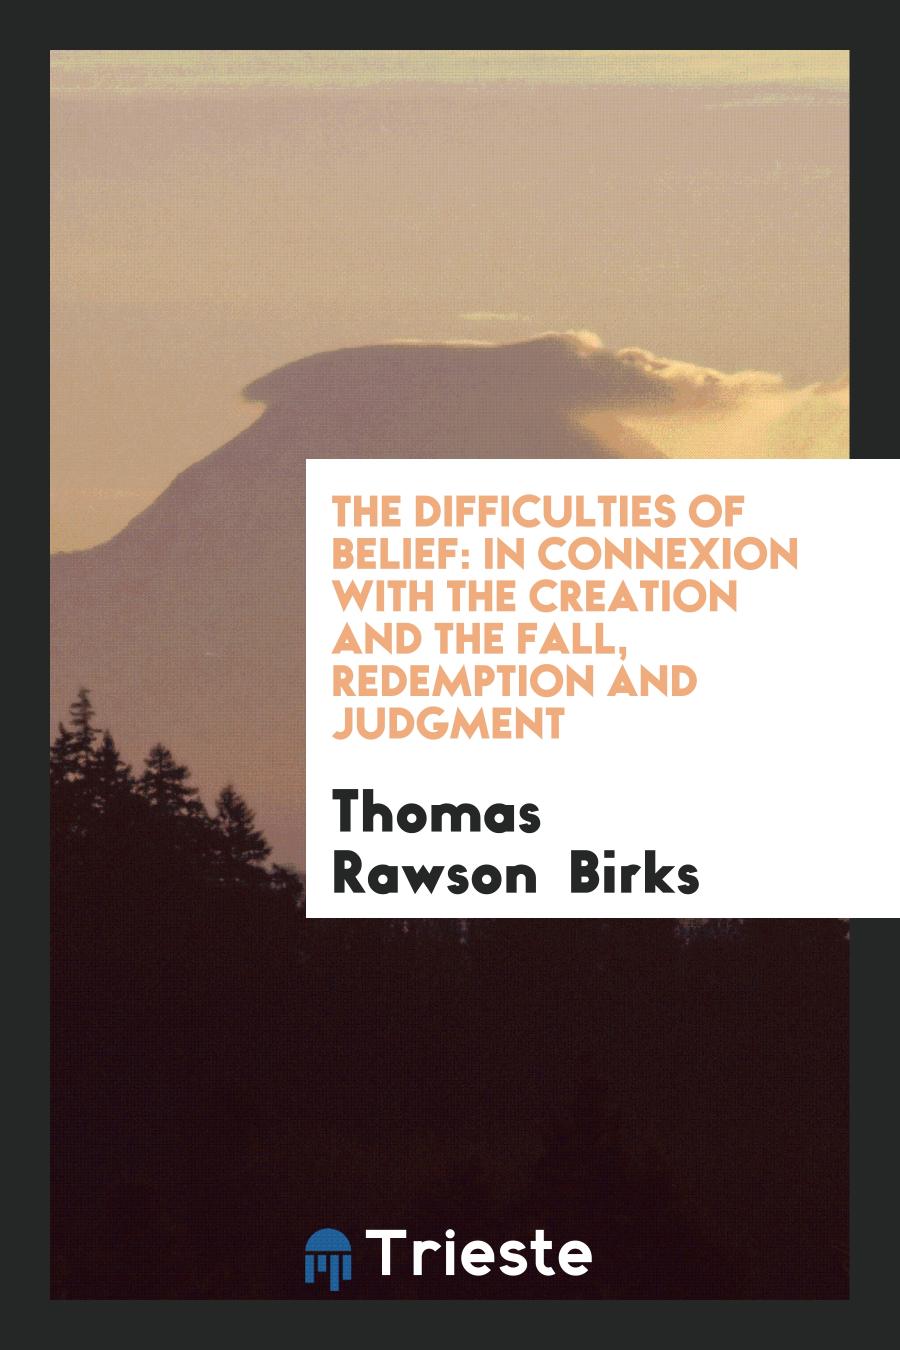 The Difficulties of Belief: In Connexion with the Creation and the Fall, Redemption and Judgment